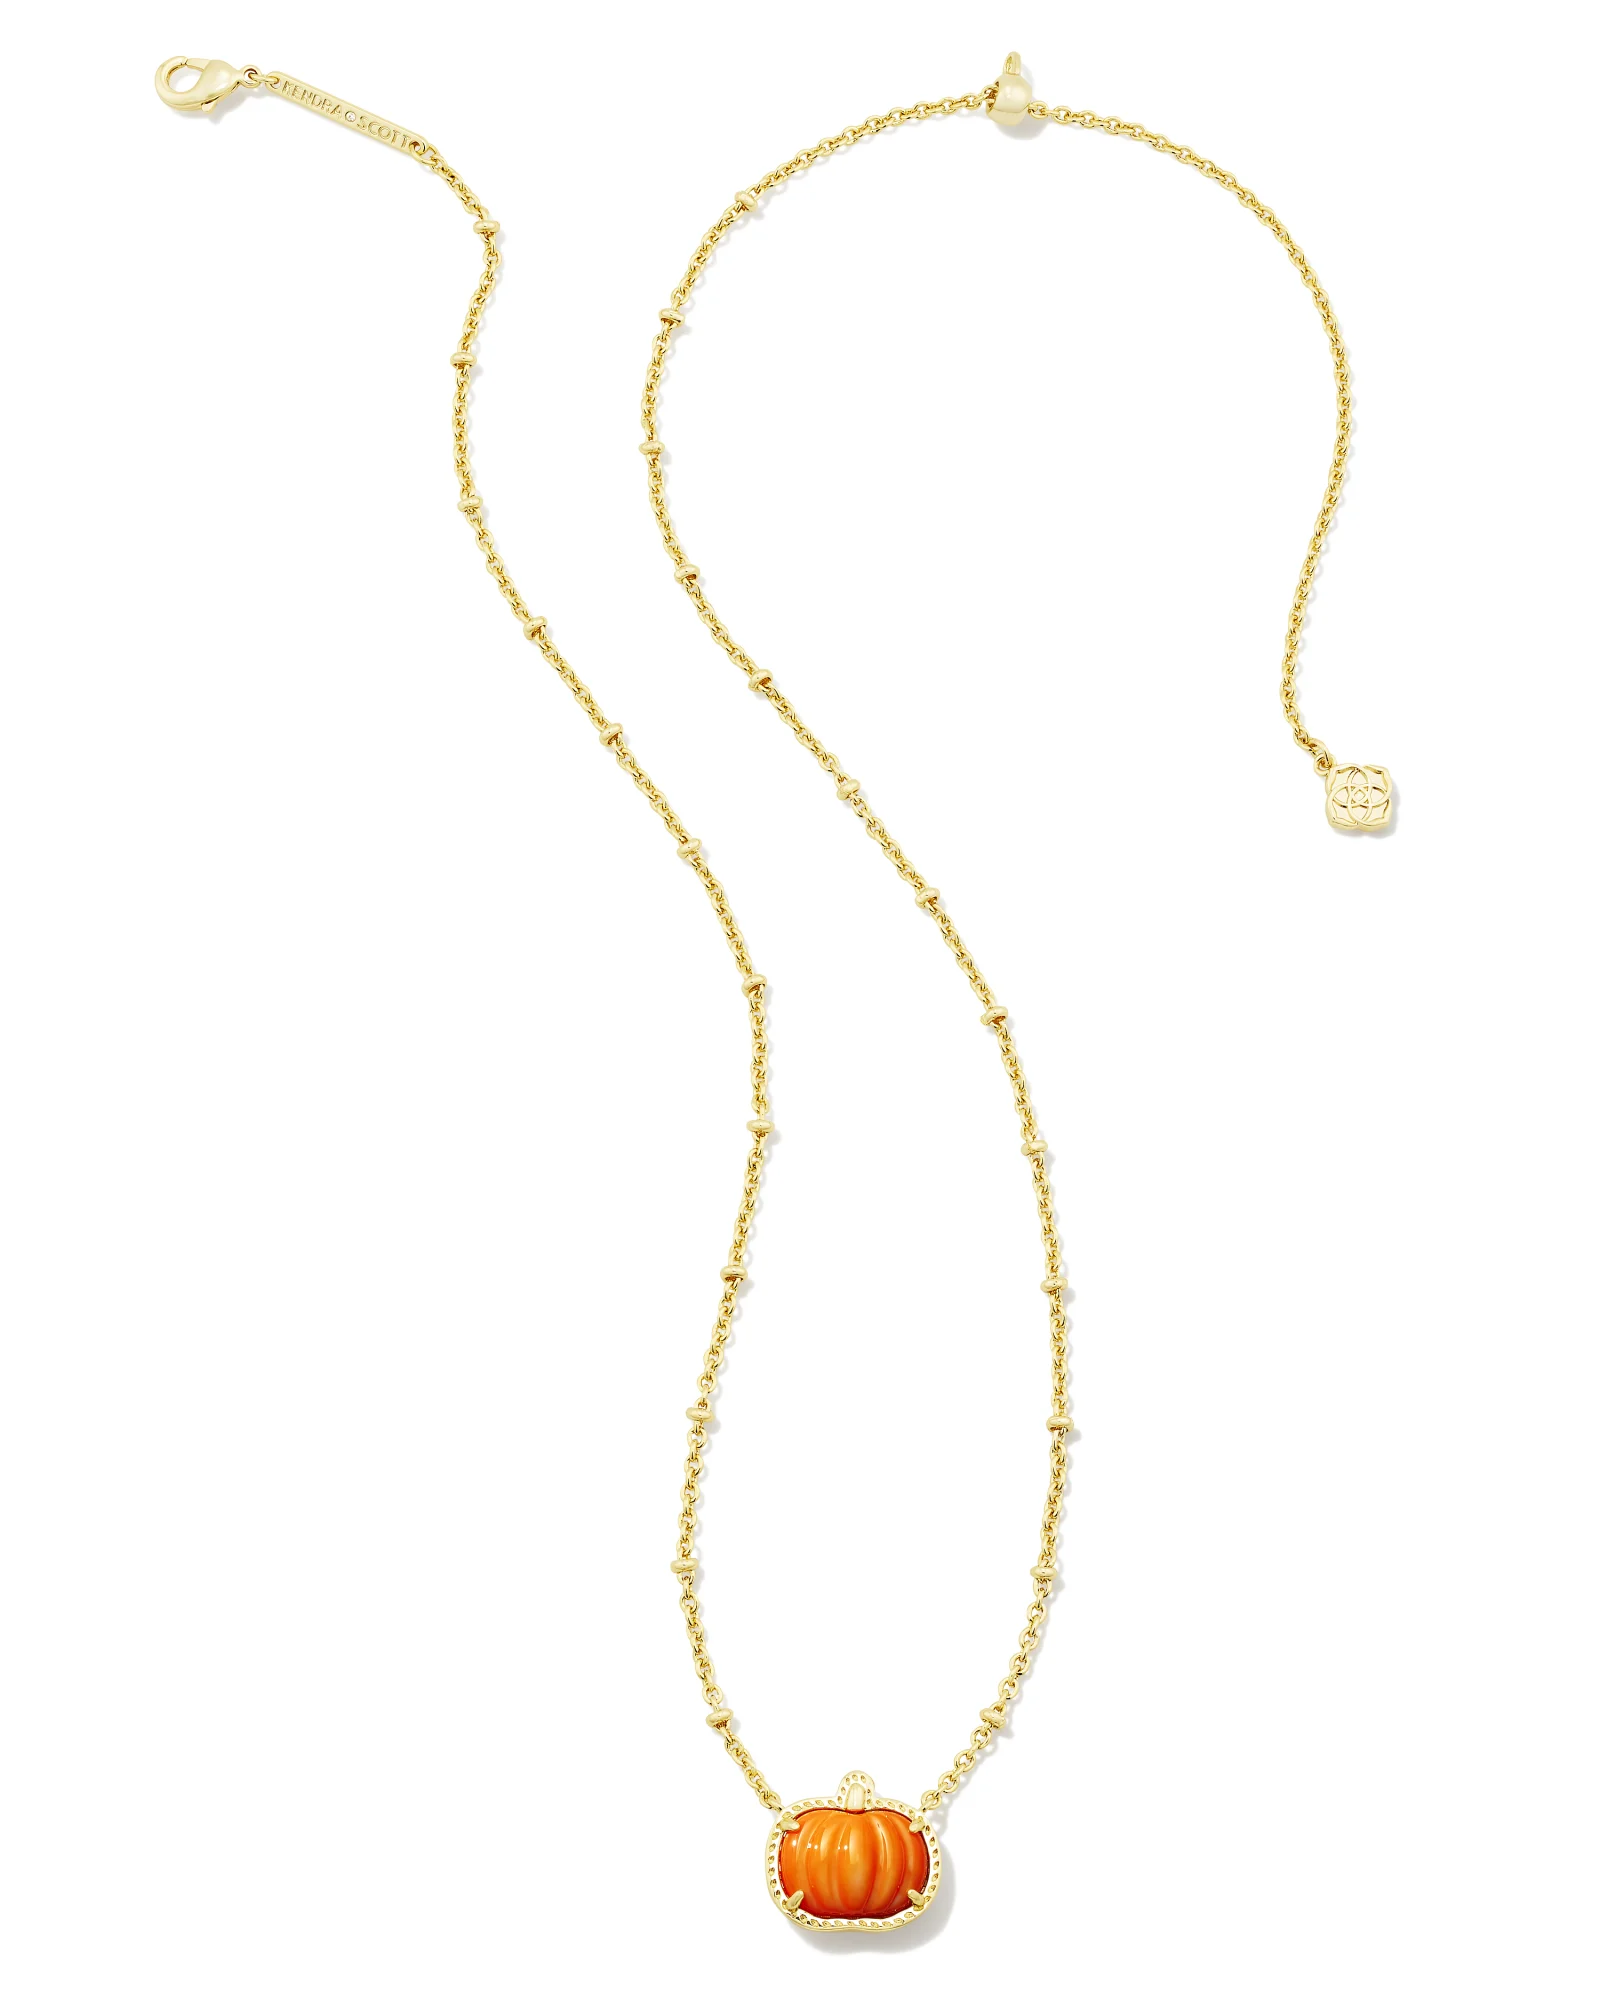 Kendra Scott Yellow Gold Plated Bailey Chain Necklace | 9608802179 |  Borsheims